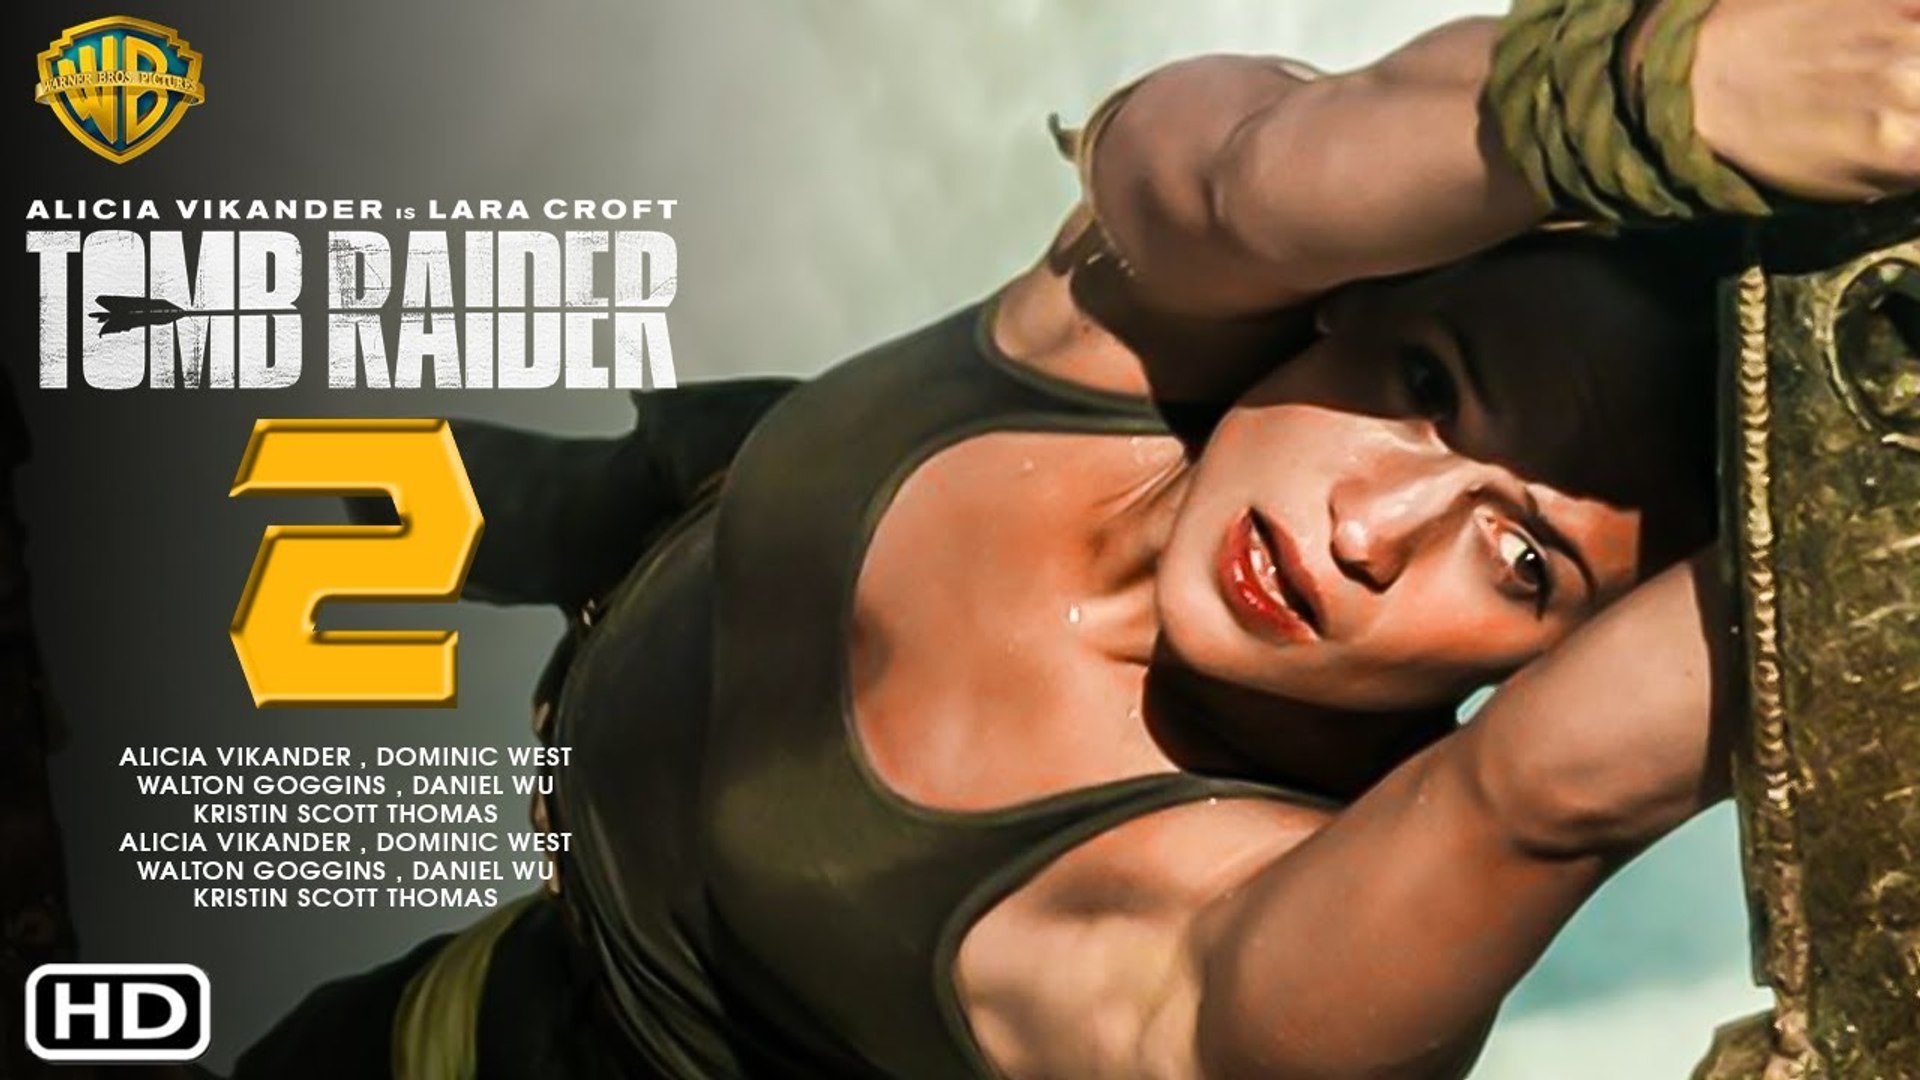 Tomb Raider 2 Movie Gets A Director And Is Dated For 2021 - PlayStation  Universe